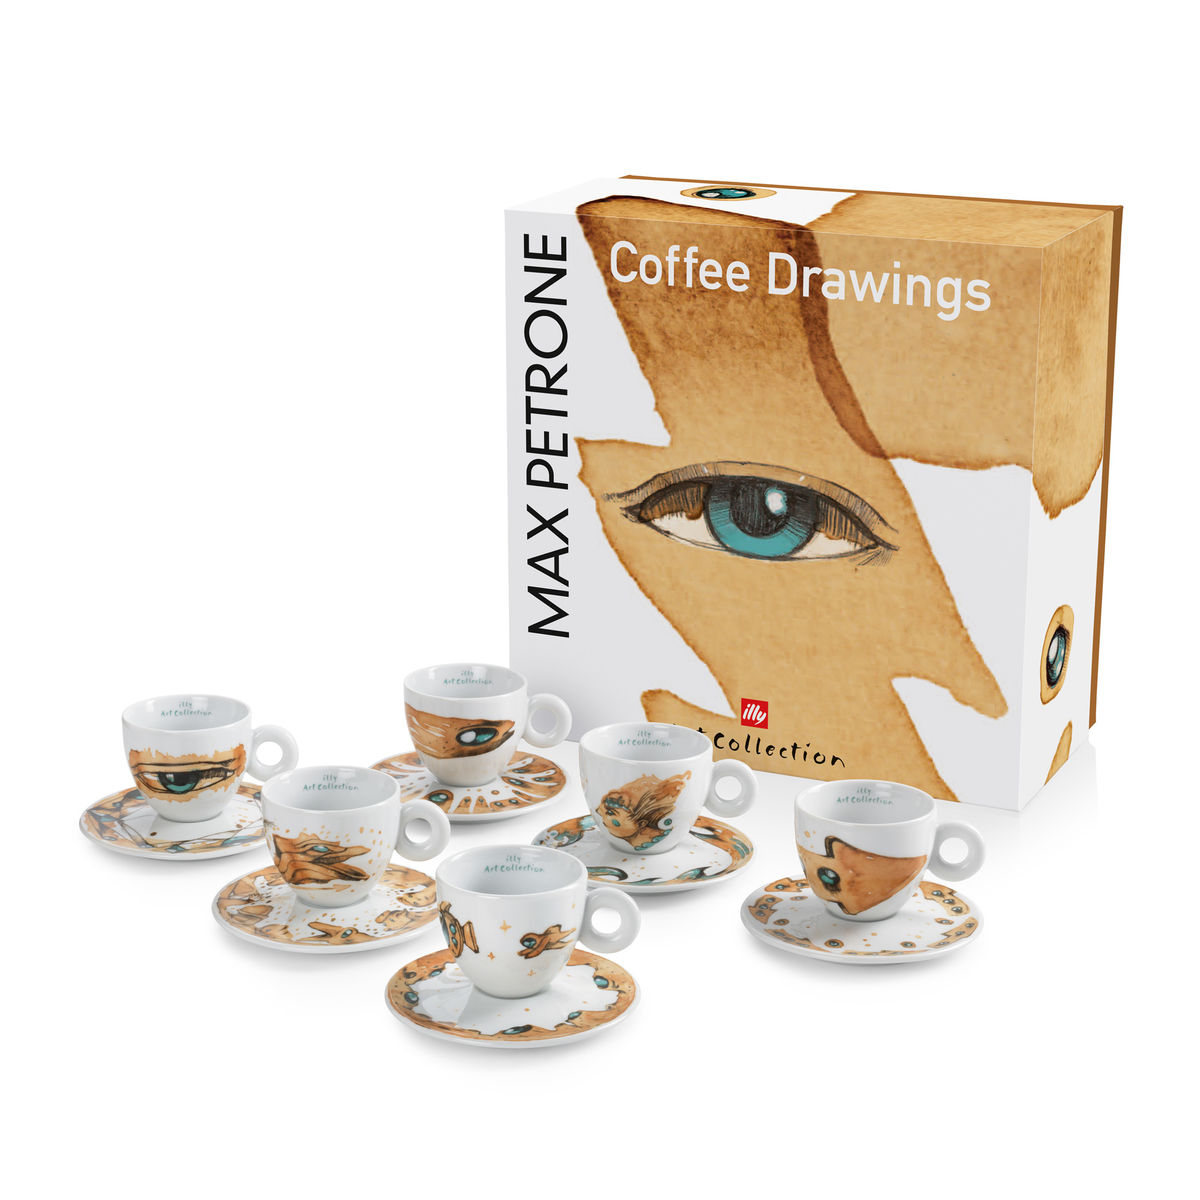 illy Max Petrone Cappuccino Cups - Six 6oz Cappuccino Cups